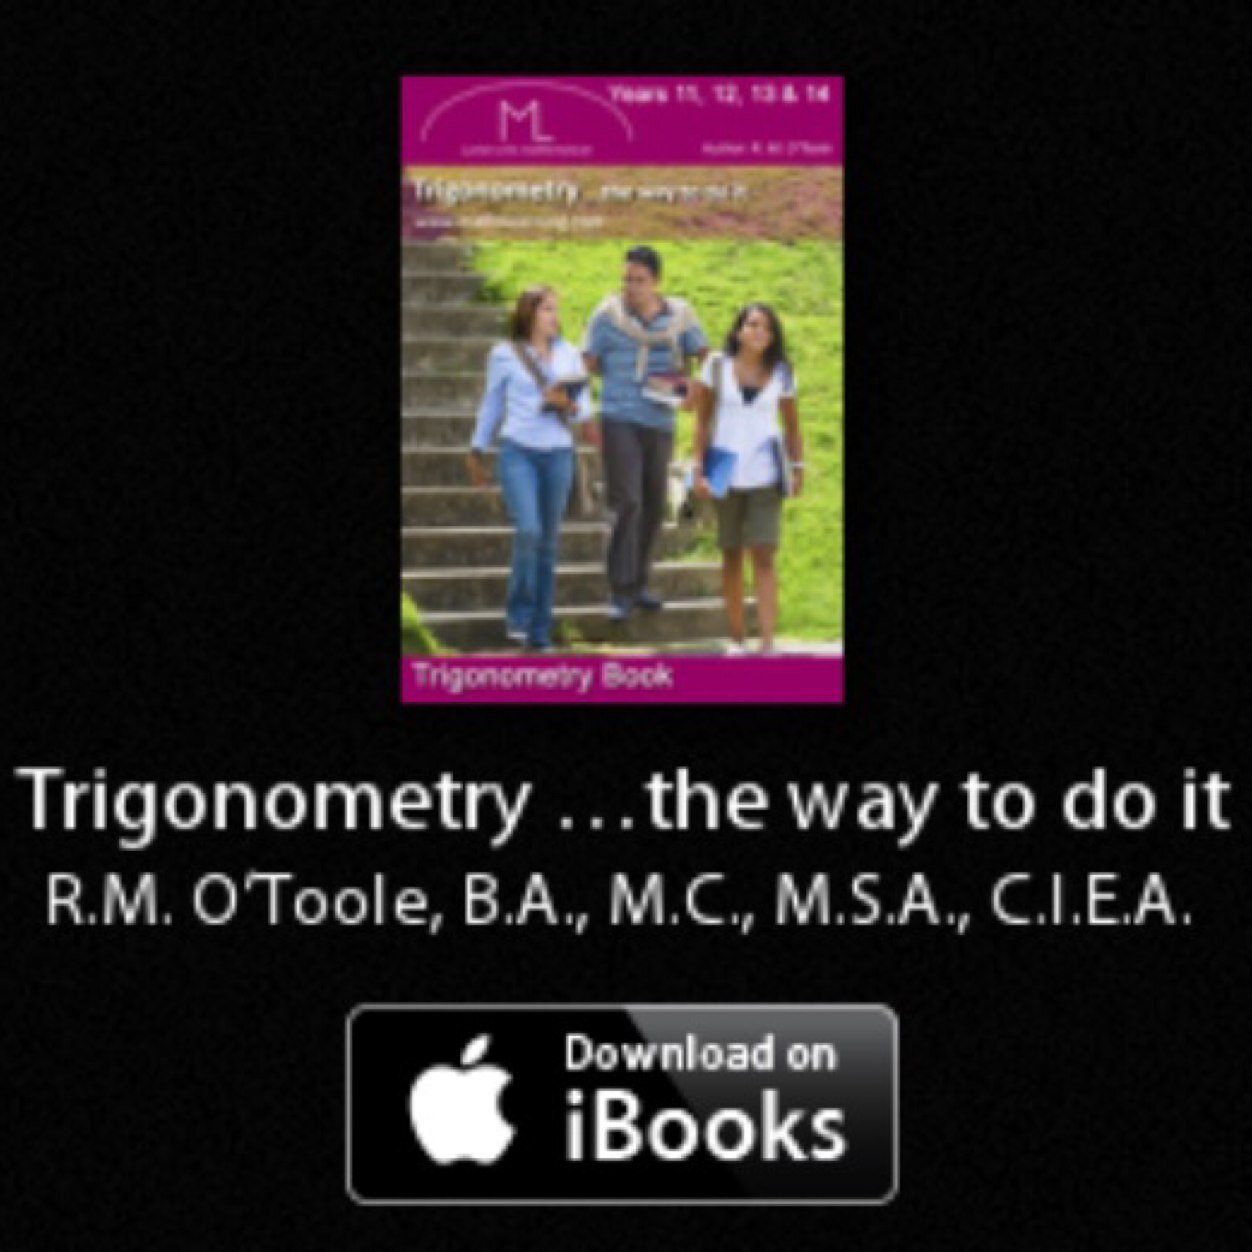 Download our Trigonometry book from iBooks